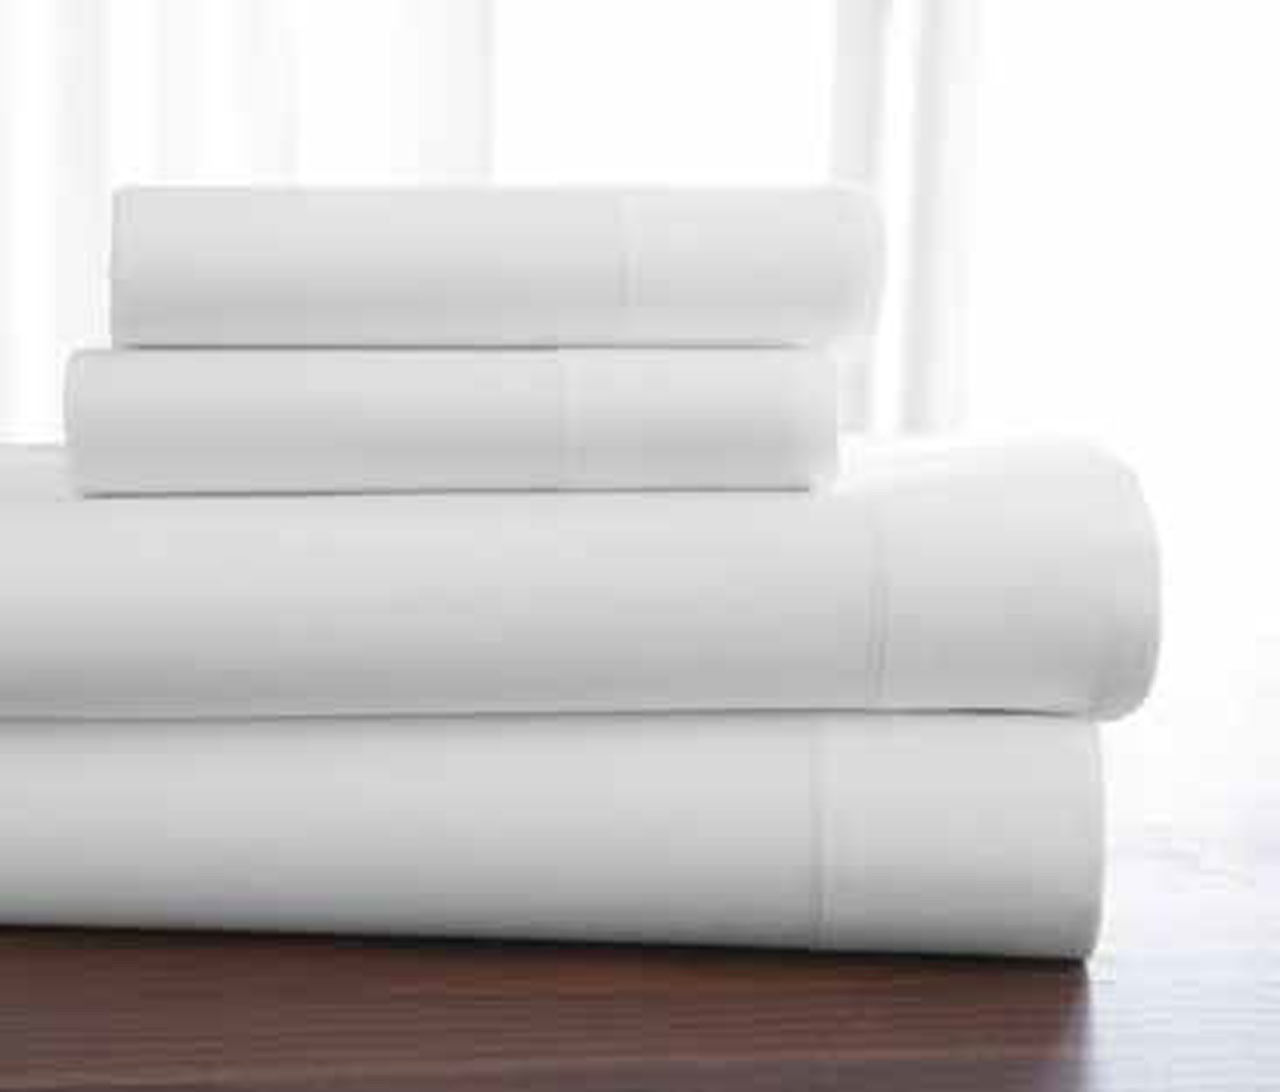 Welspun T-400 Premium Hygrocotton Sheets Questions & Answers